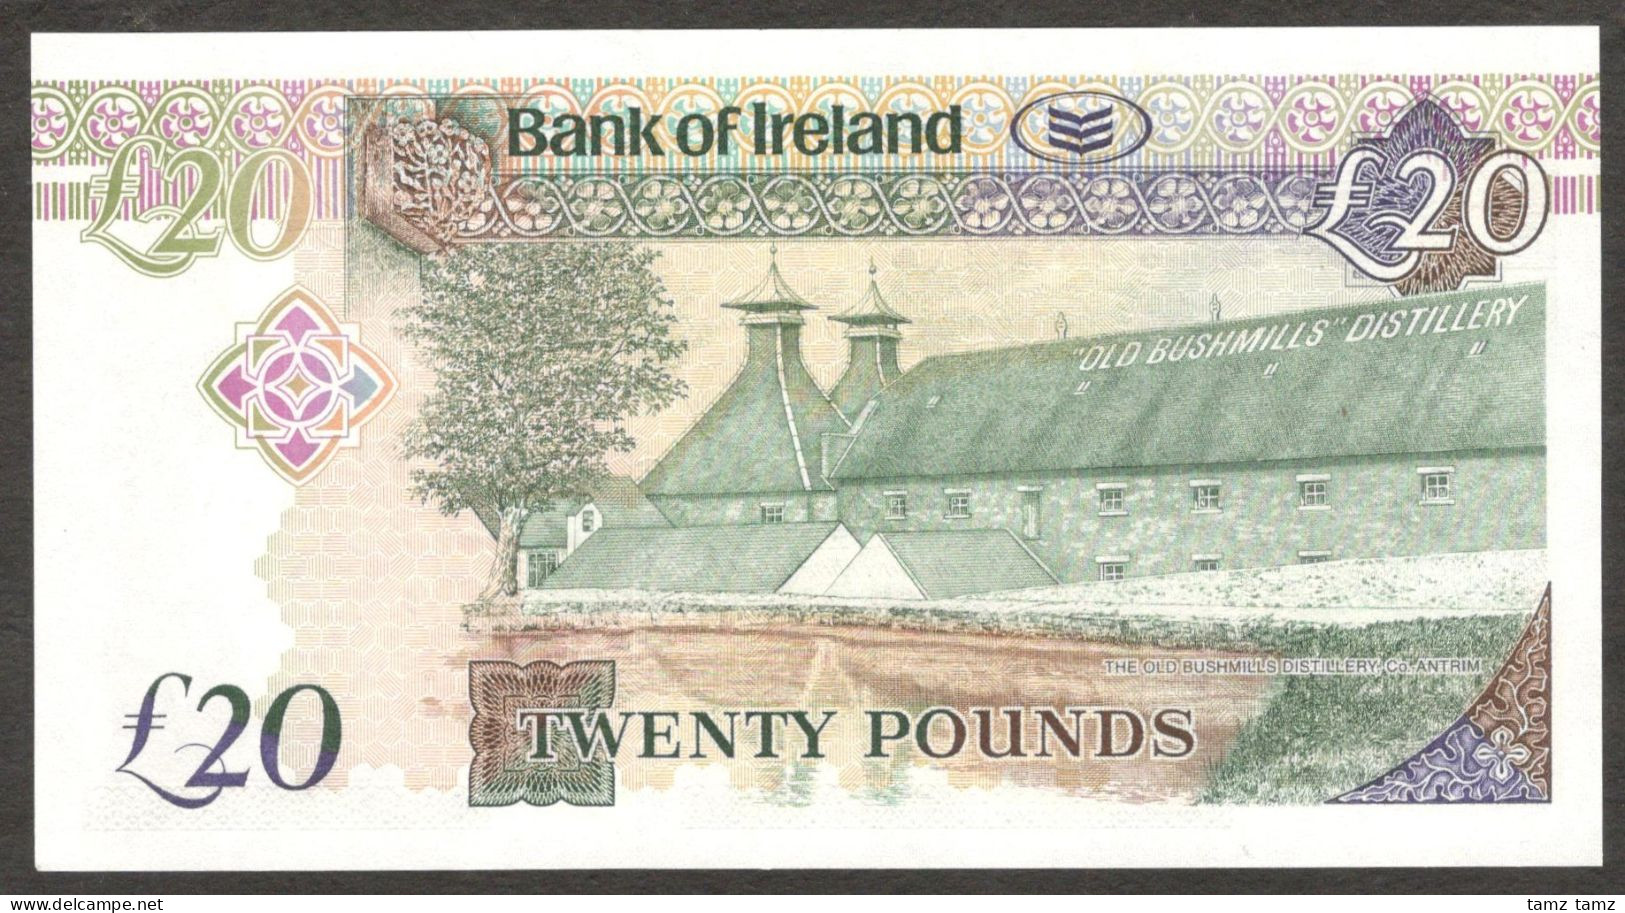 Ireland 20 Pounds Sterling 2008 P-85 Old Bushmills Distillery 2008 UNC Colorful - Ireland